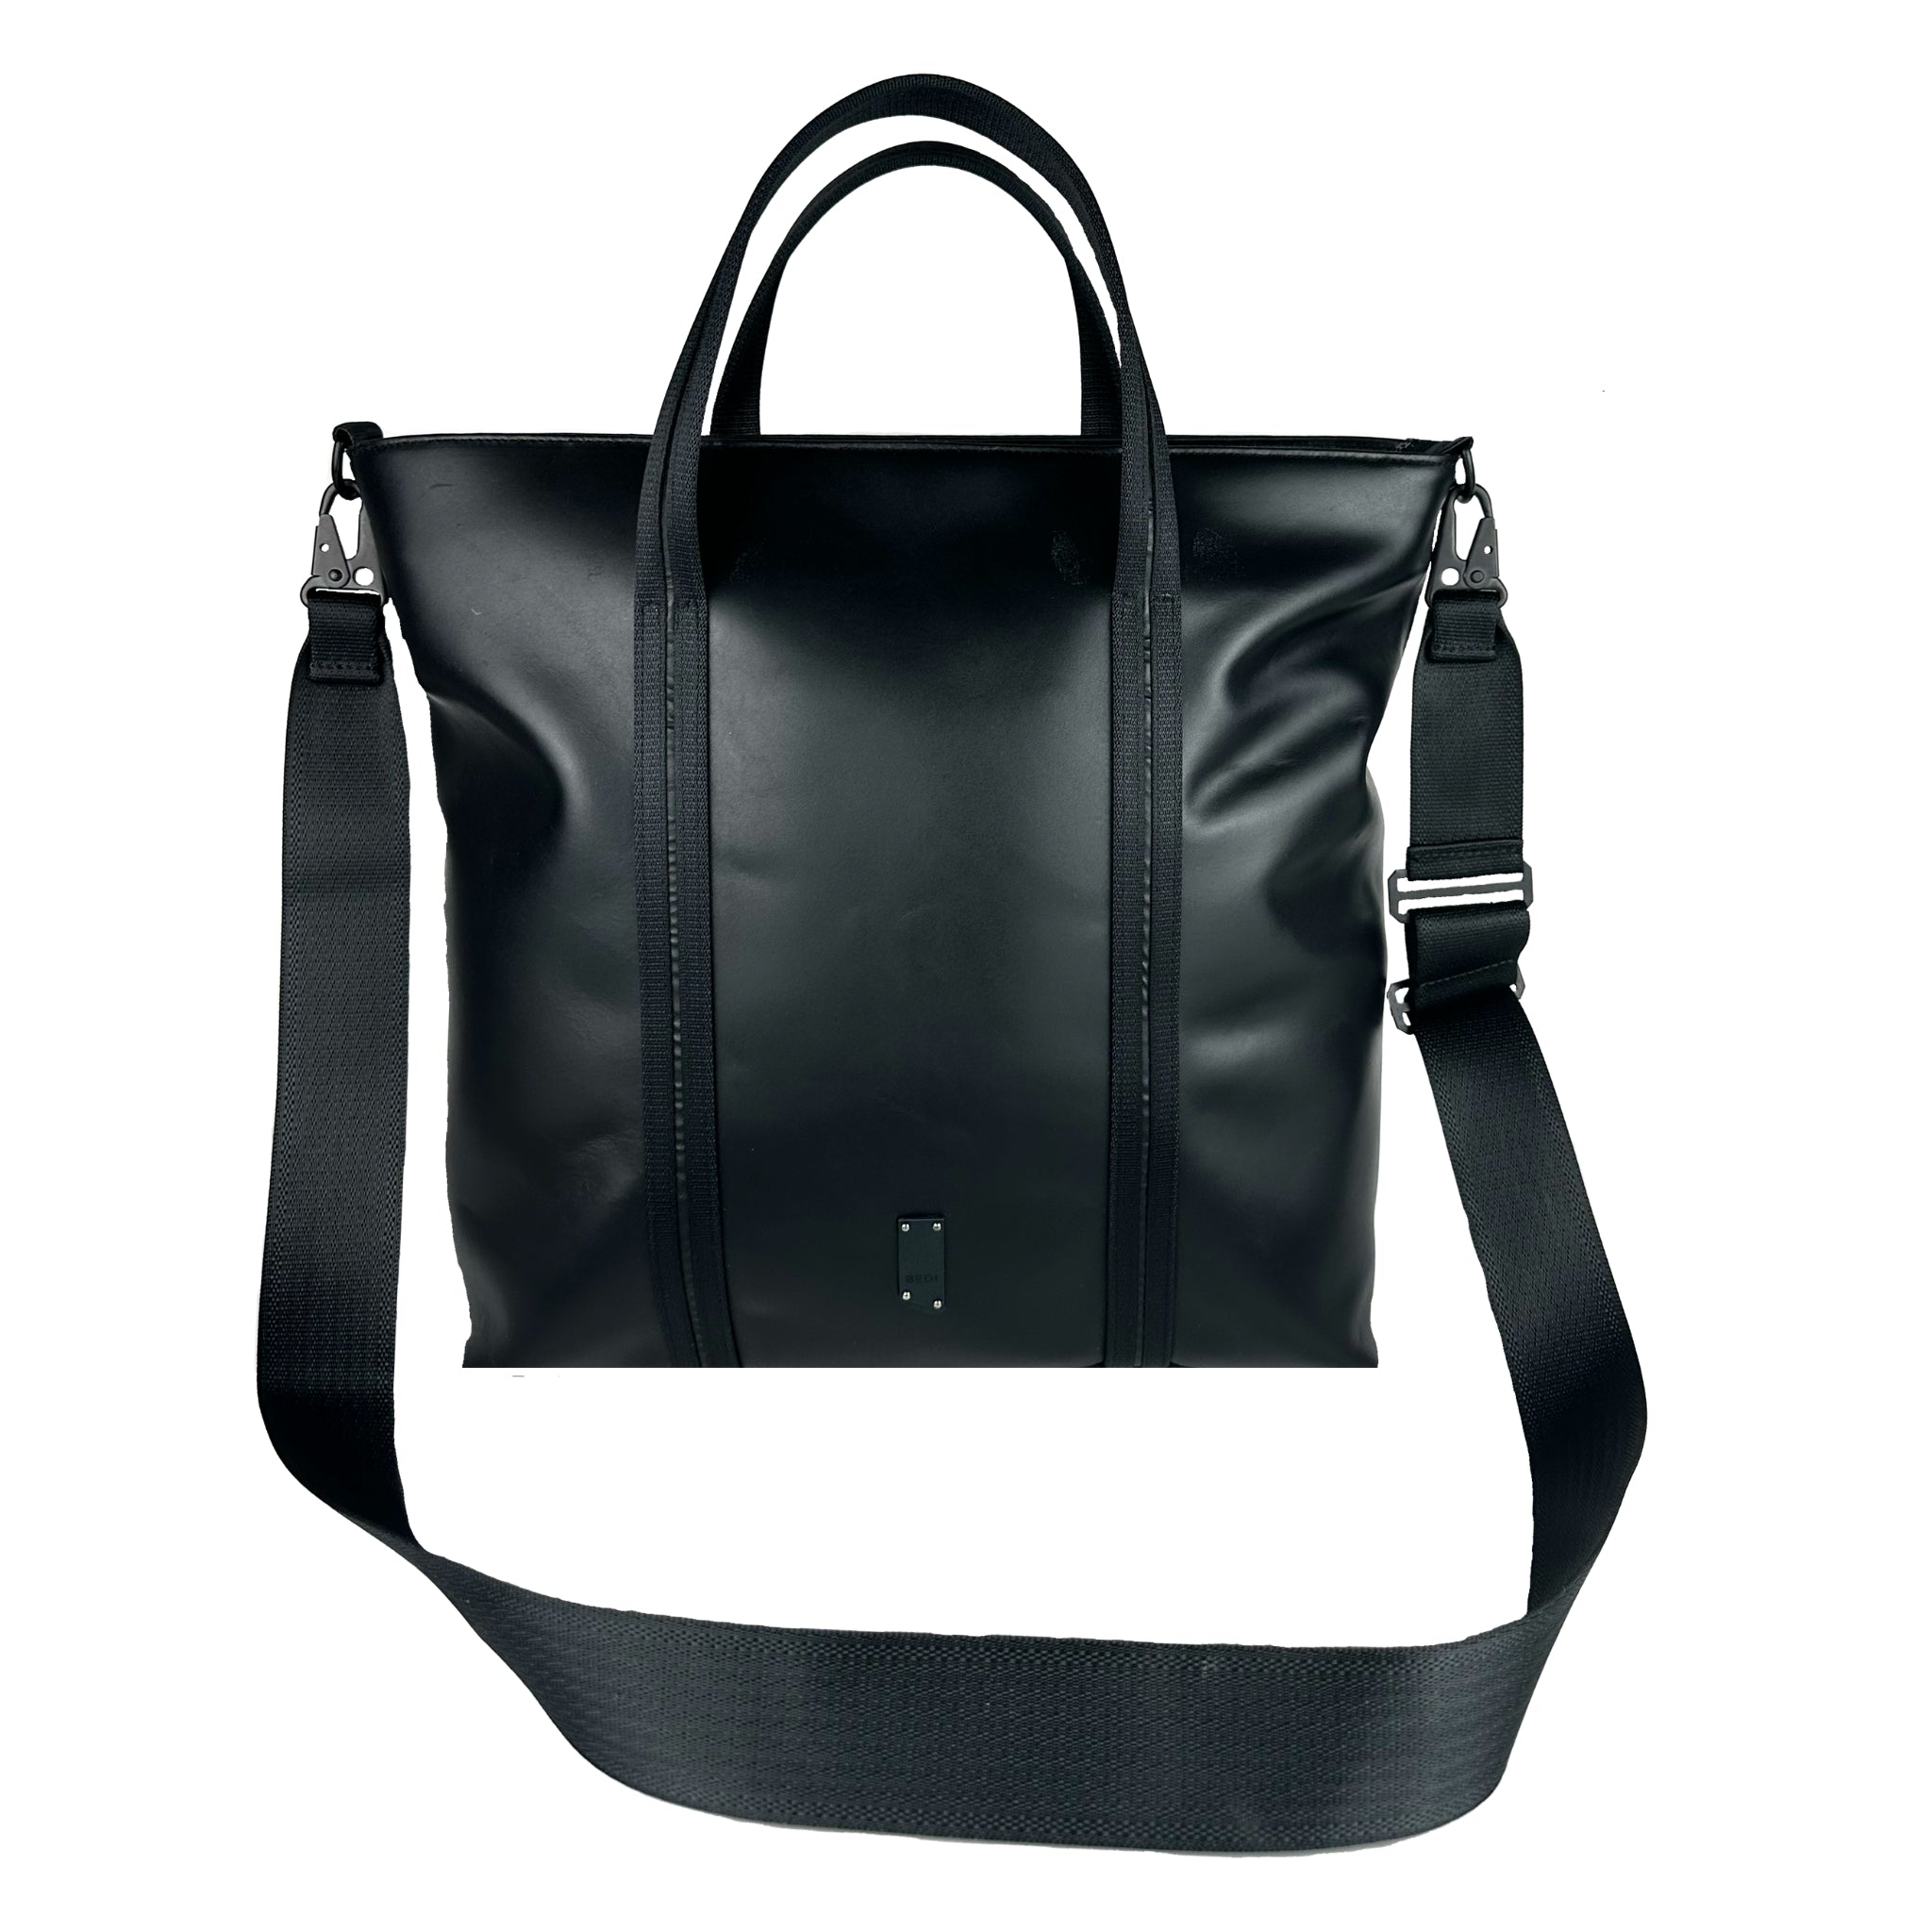 Front view (with handle detail) of our work/office tote in black upcycled leather against a white background